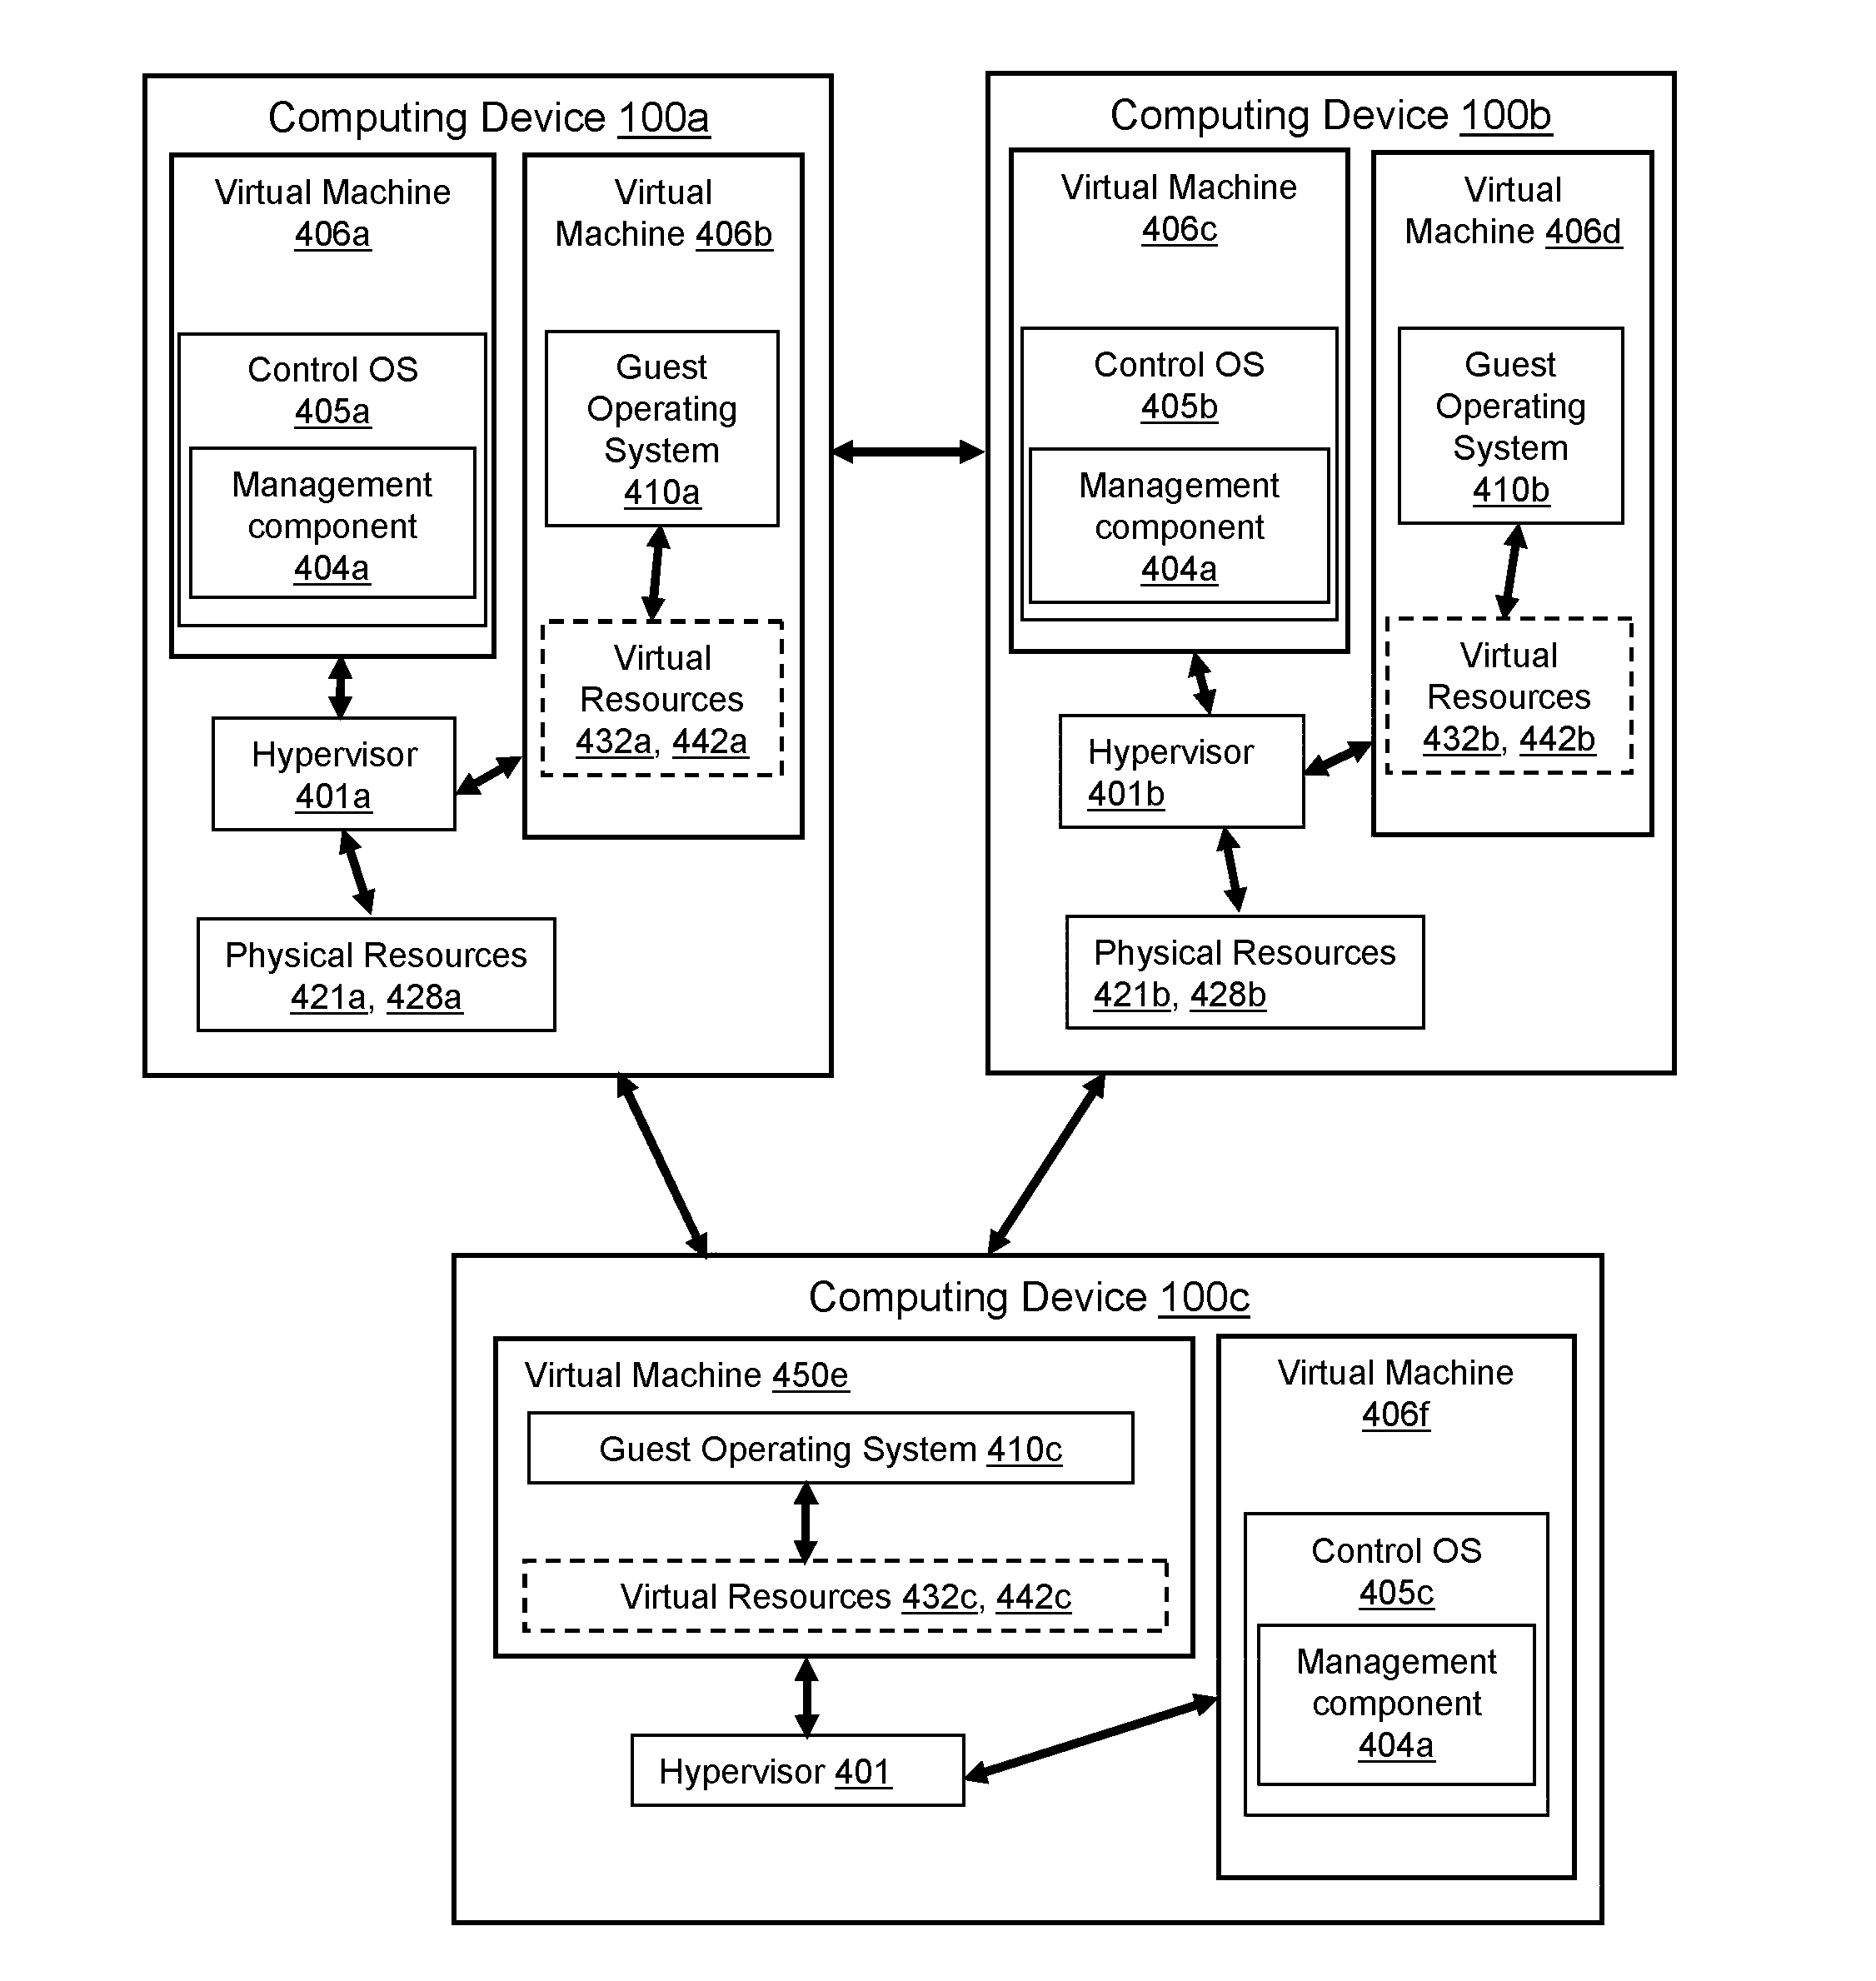 Systems and methods for initialization and link management of nics in a multi-core environment